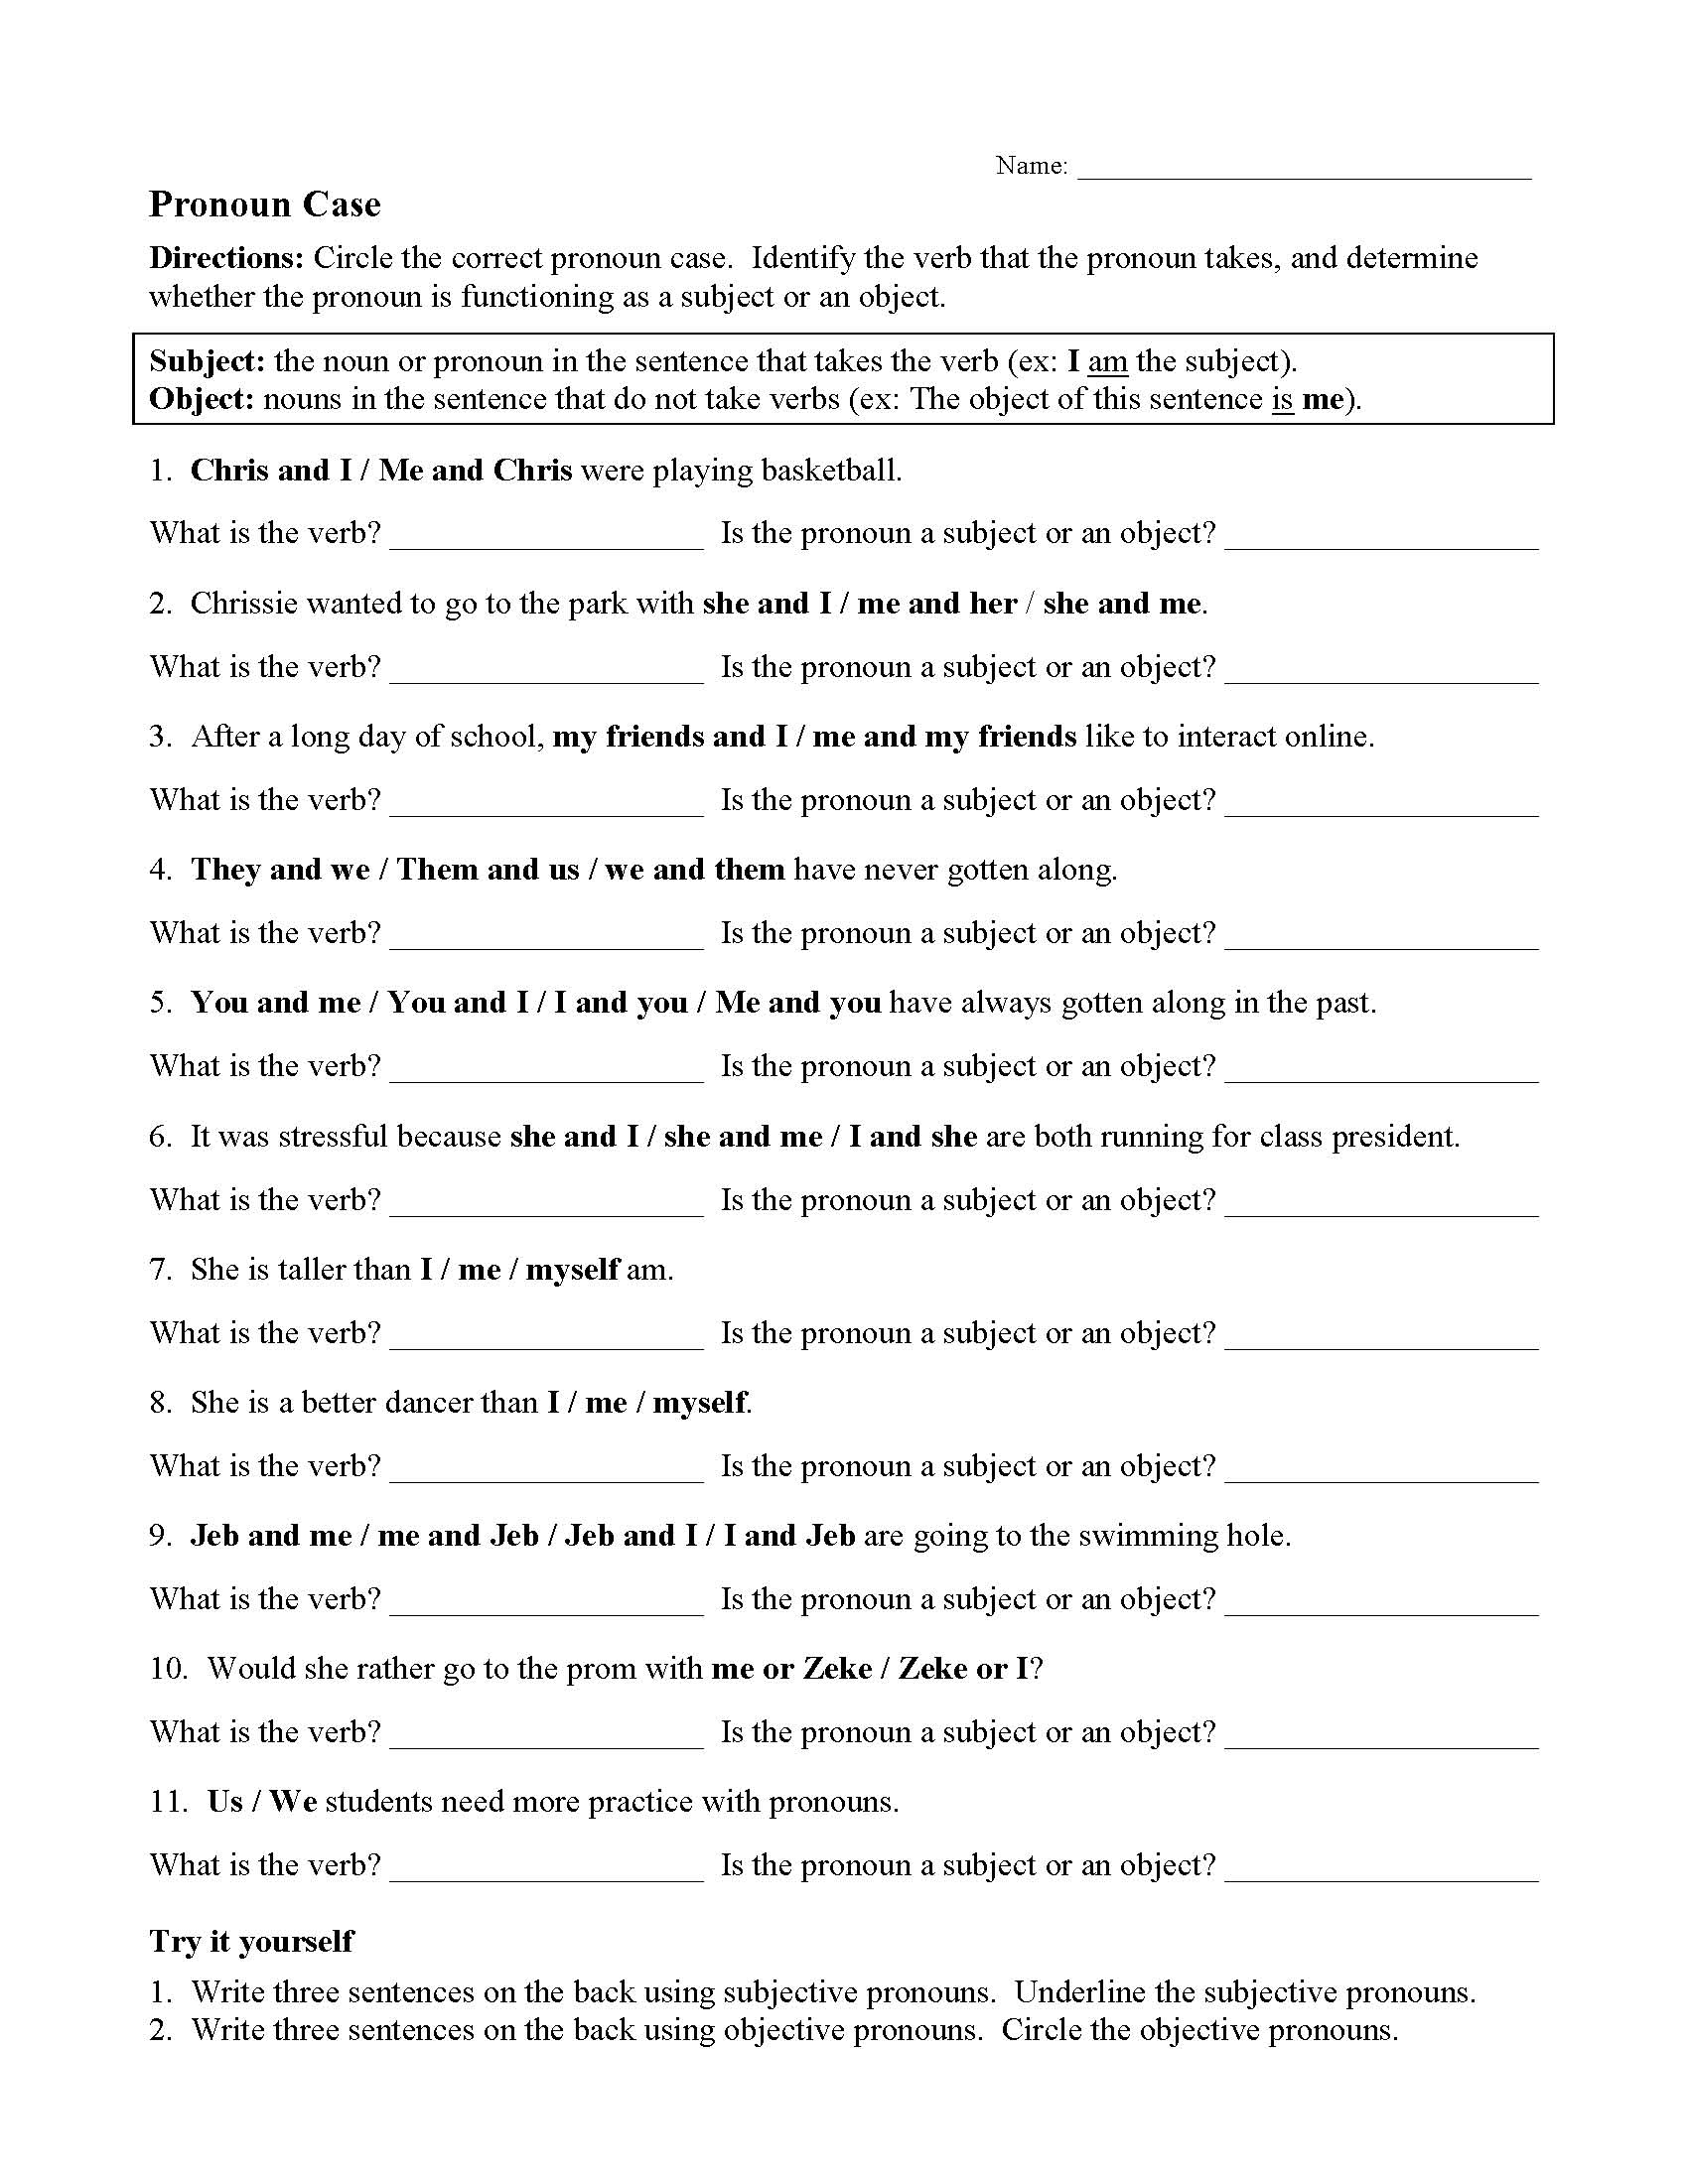 This is a preview image of the Pronoun Case Worksheet.